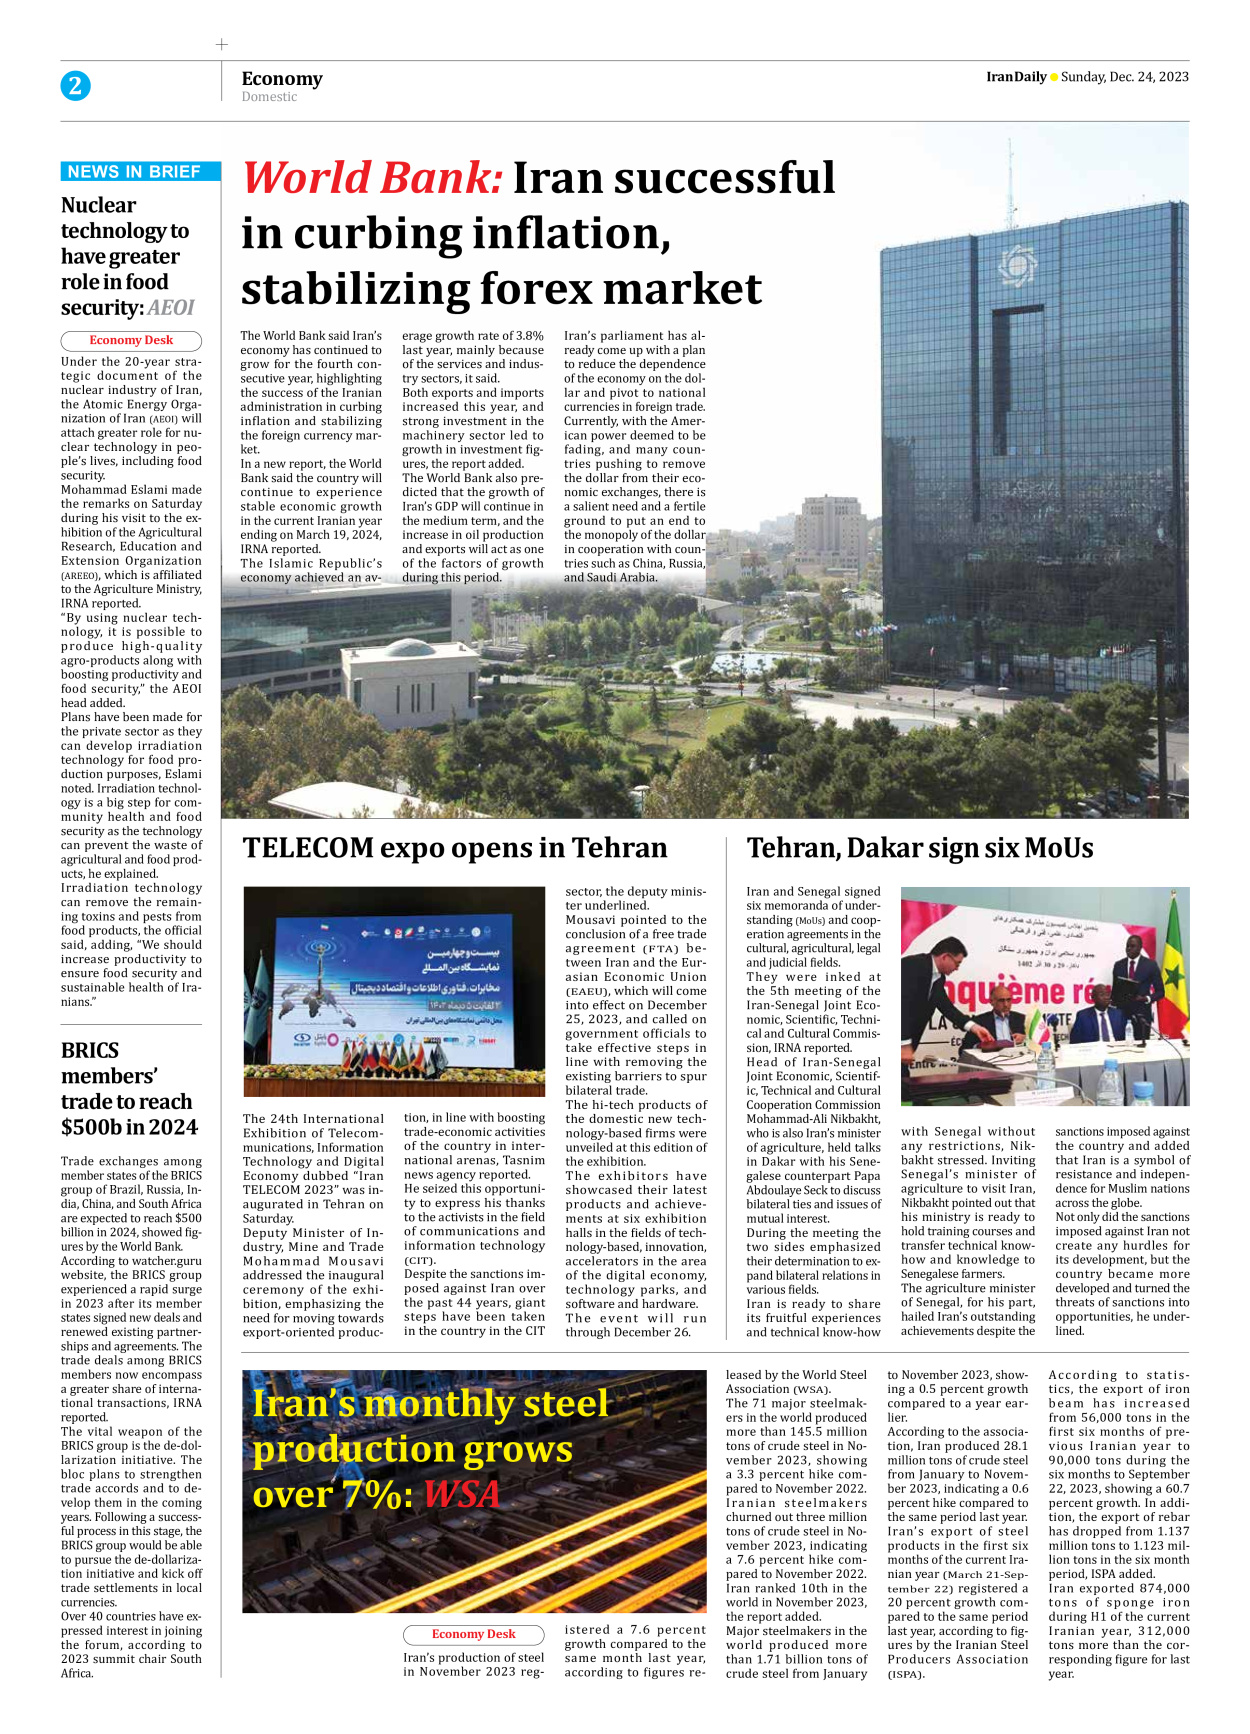 Iran Daily - Number Seven Thousand Four Hundred and Sixty Six - 24 December 2023 - Page 2